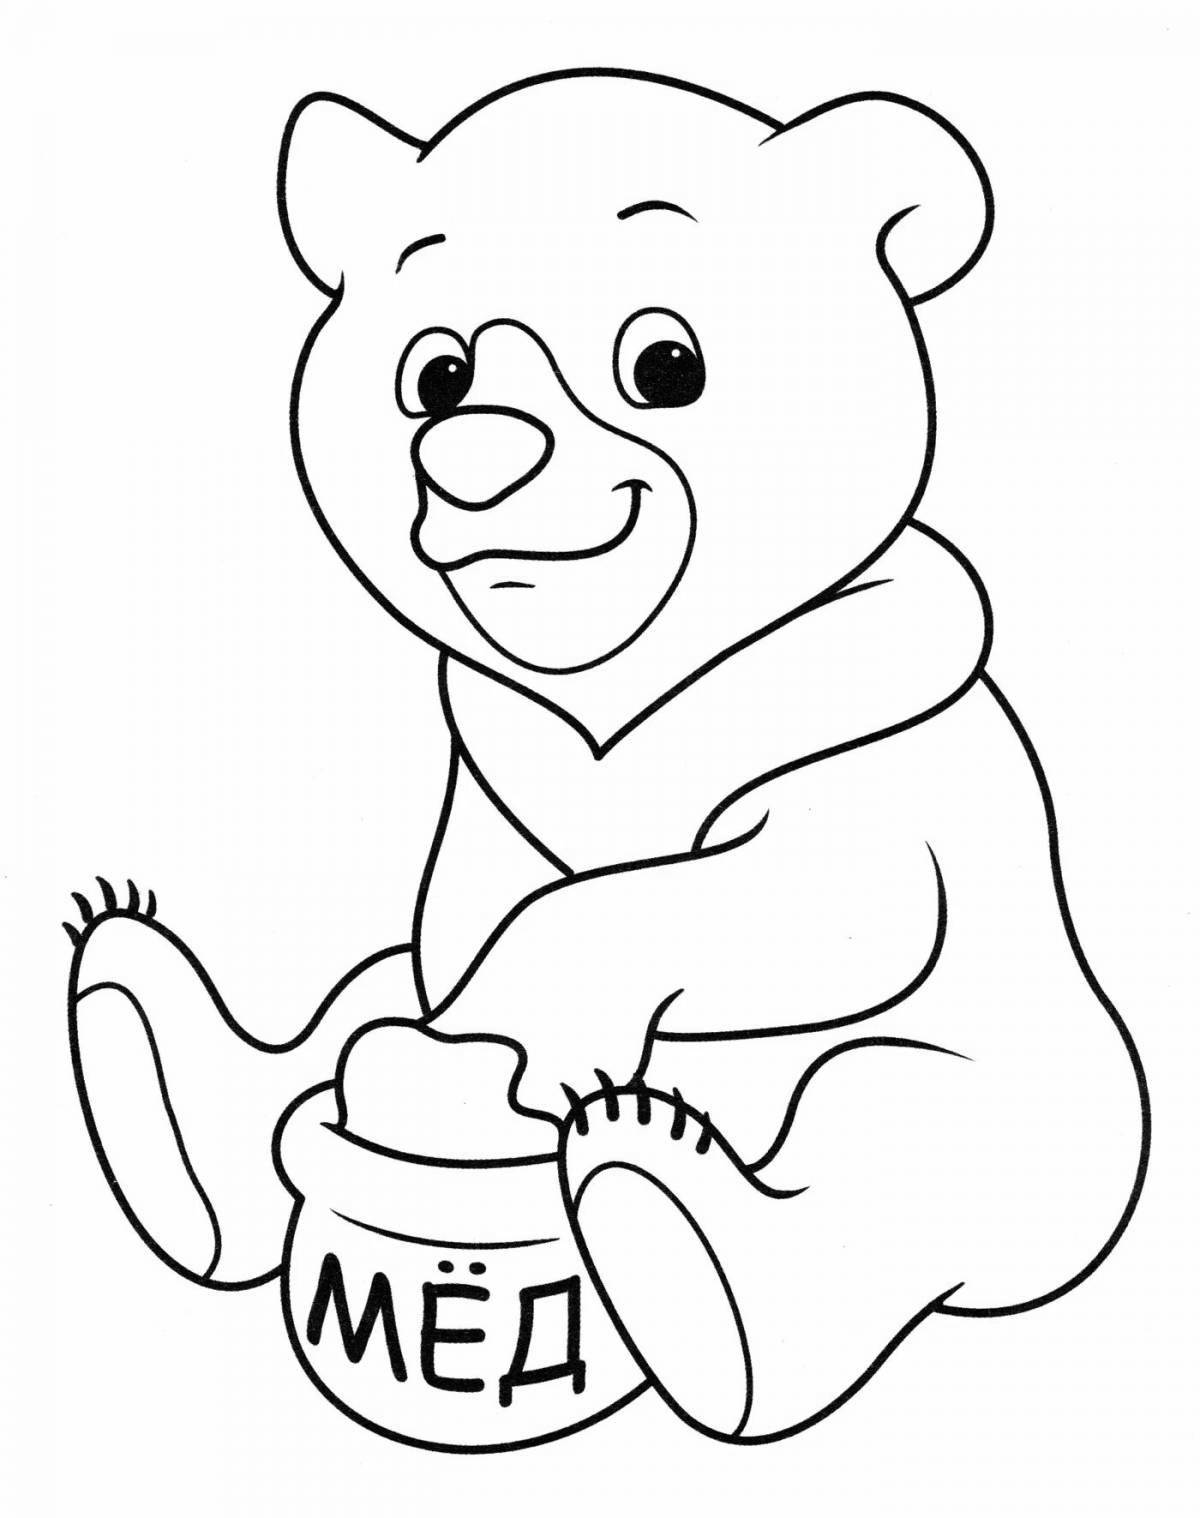 Cute clumsy bear coloring book